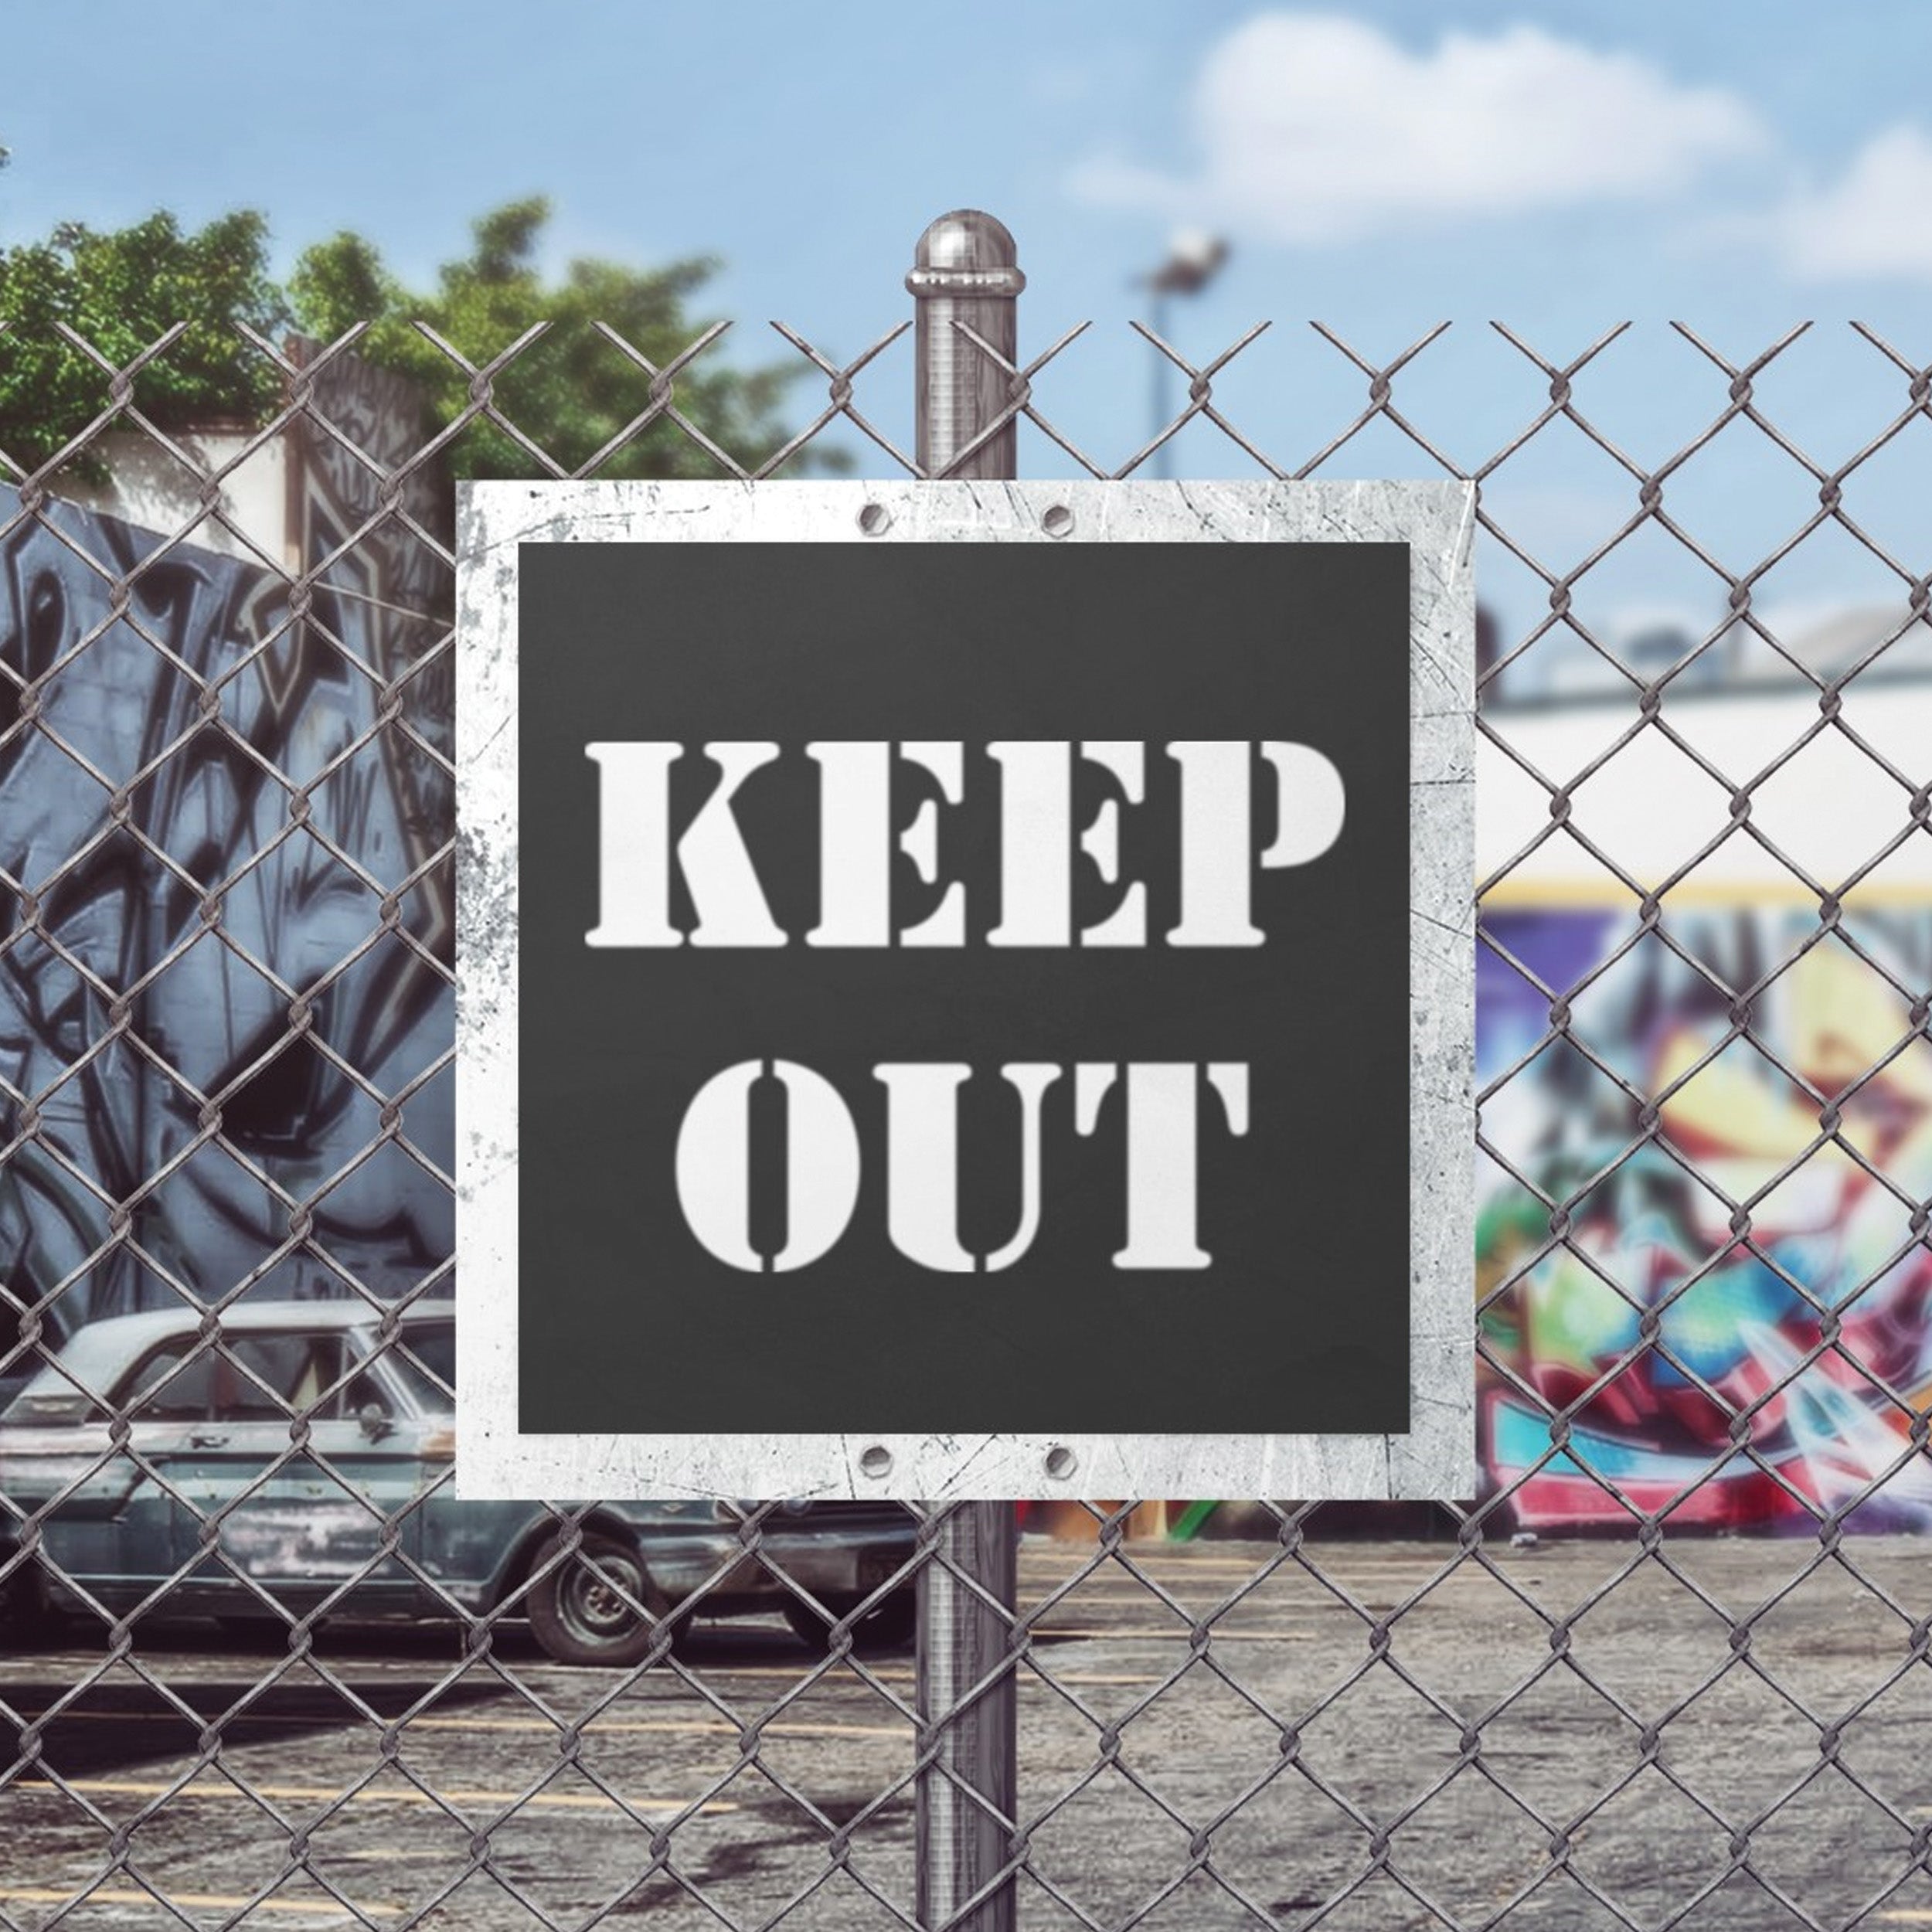 Keep Out Sign Stencil - Large Keep Out Template